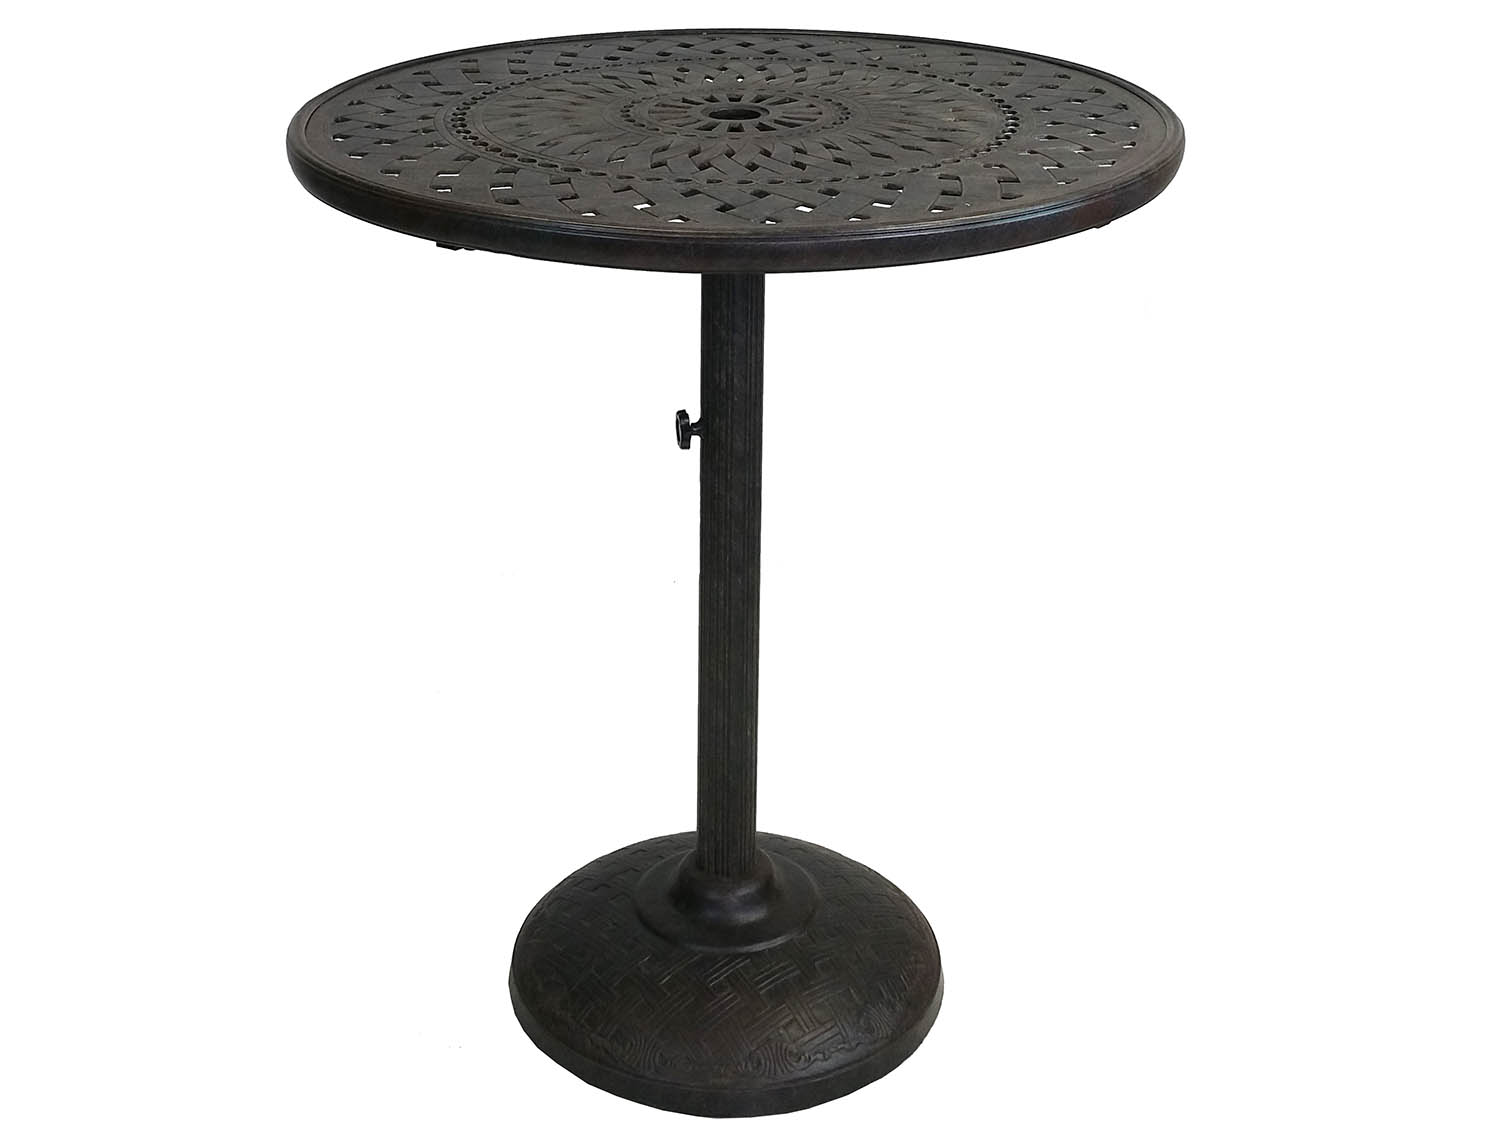 Belmont 42 Inch Bar Table W/ Built In Umbrella Stand